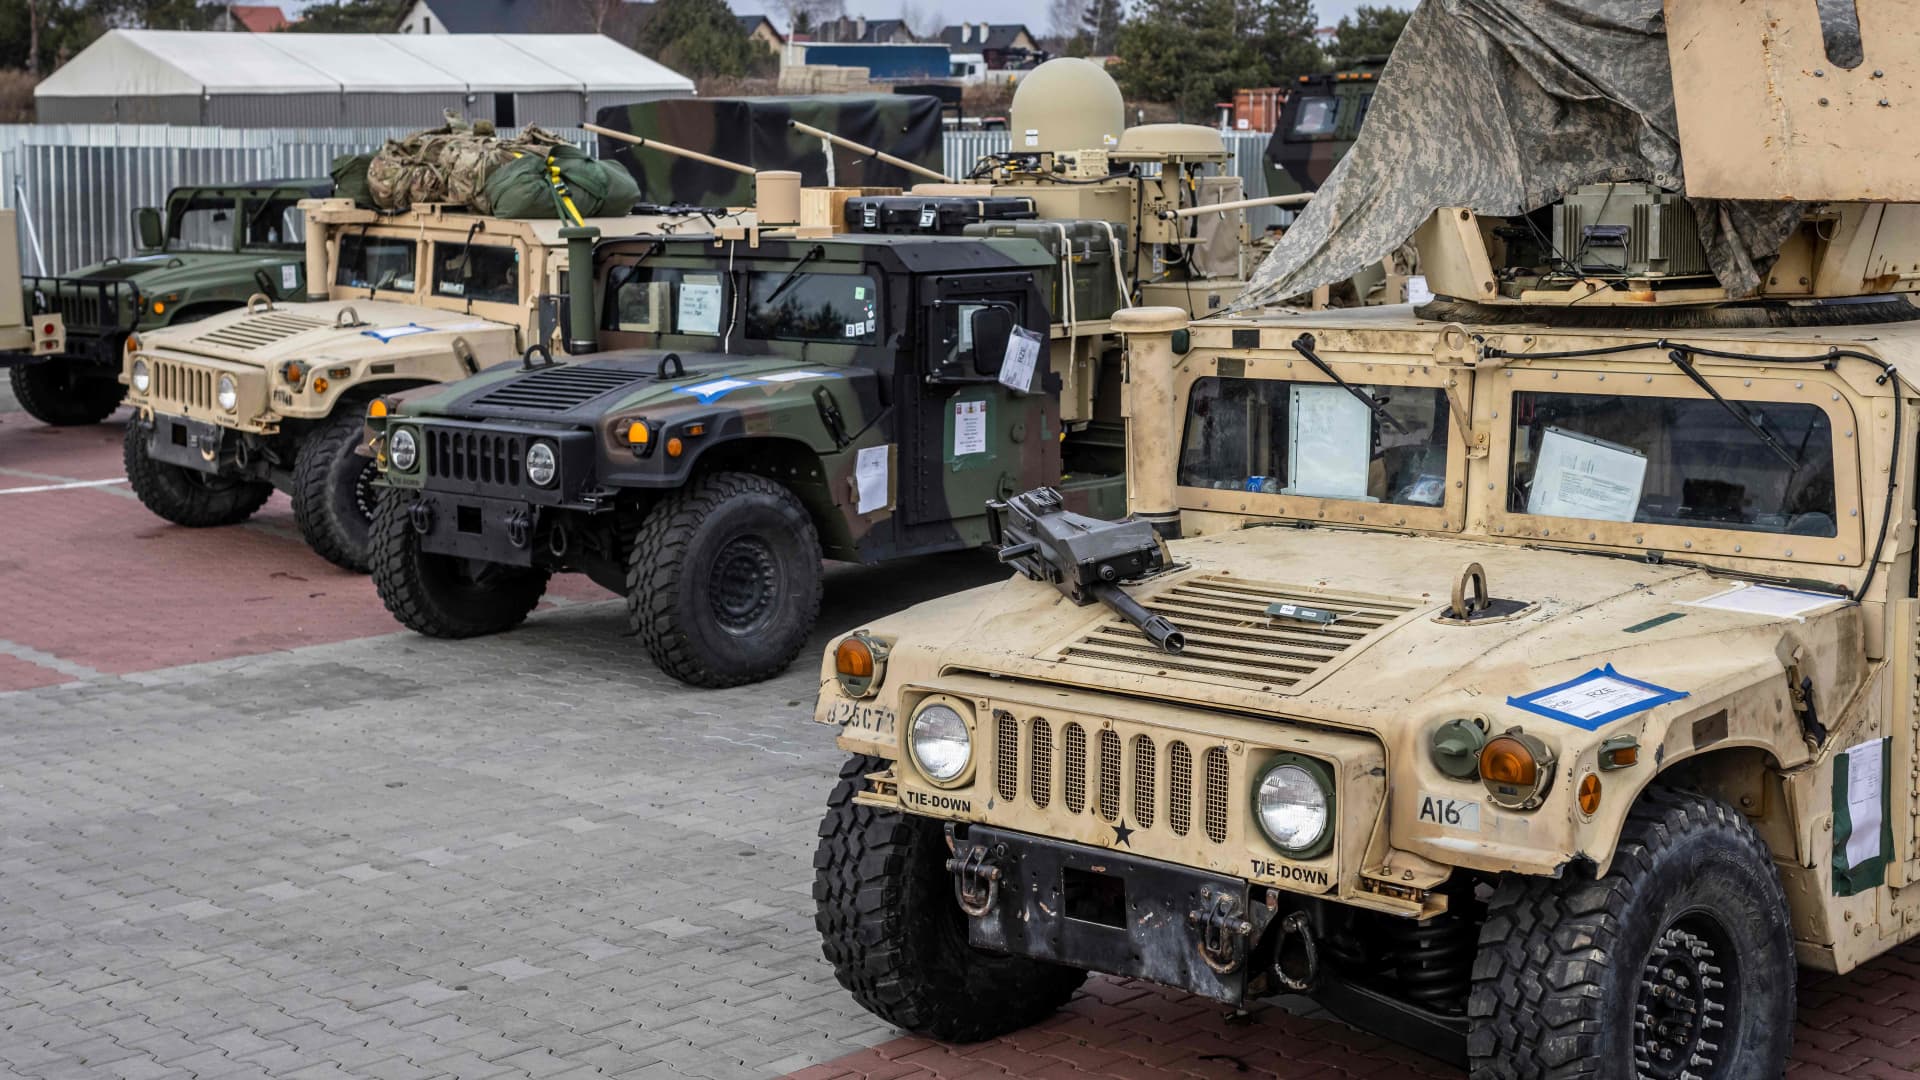 Vehicles of the US army are seen at a temporary base installed close to the Rzeszow-Jasionka Airport, south eastern Poland, February 16, 2022.